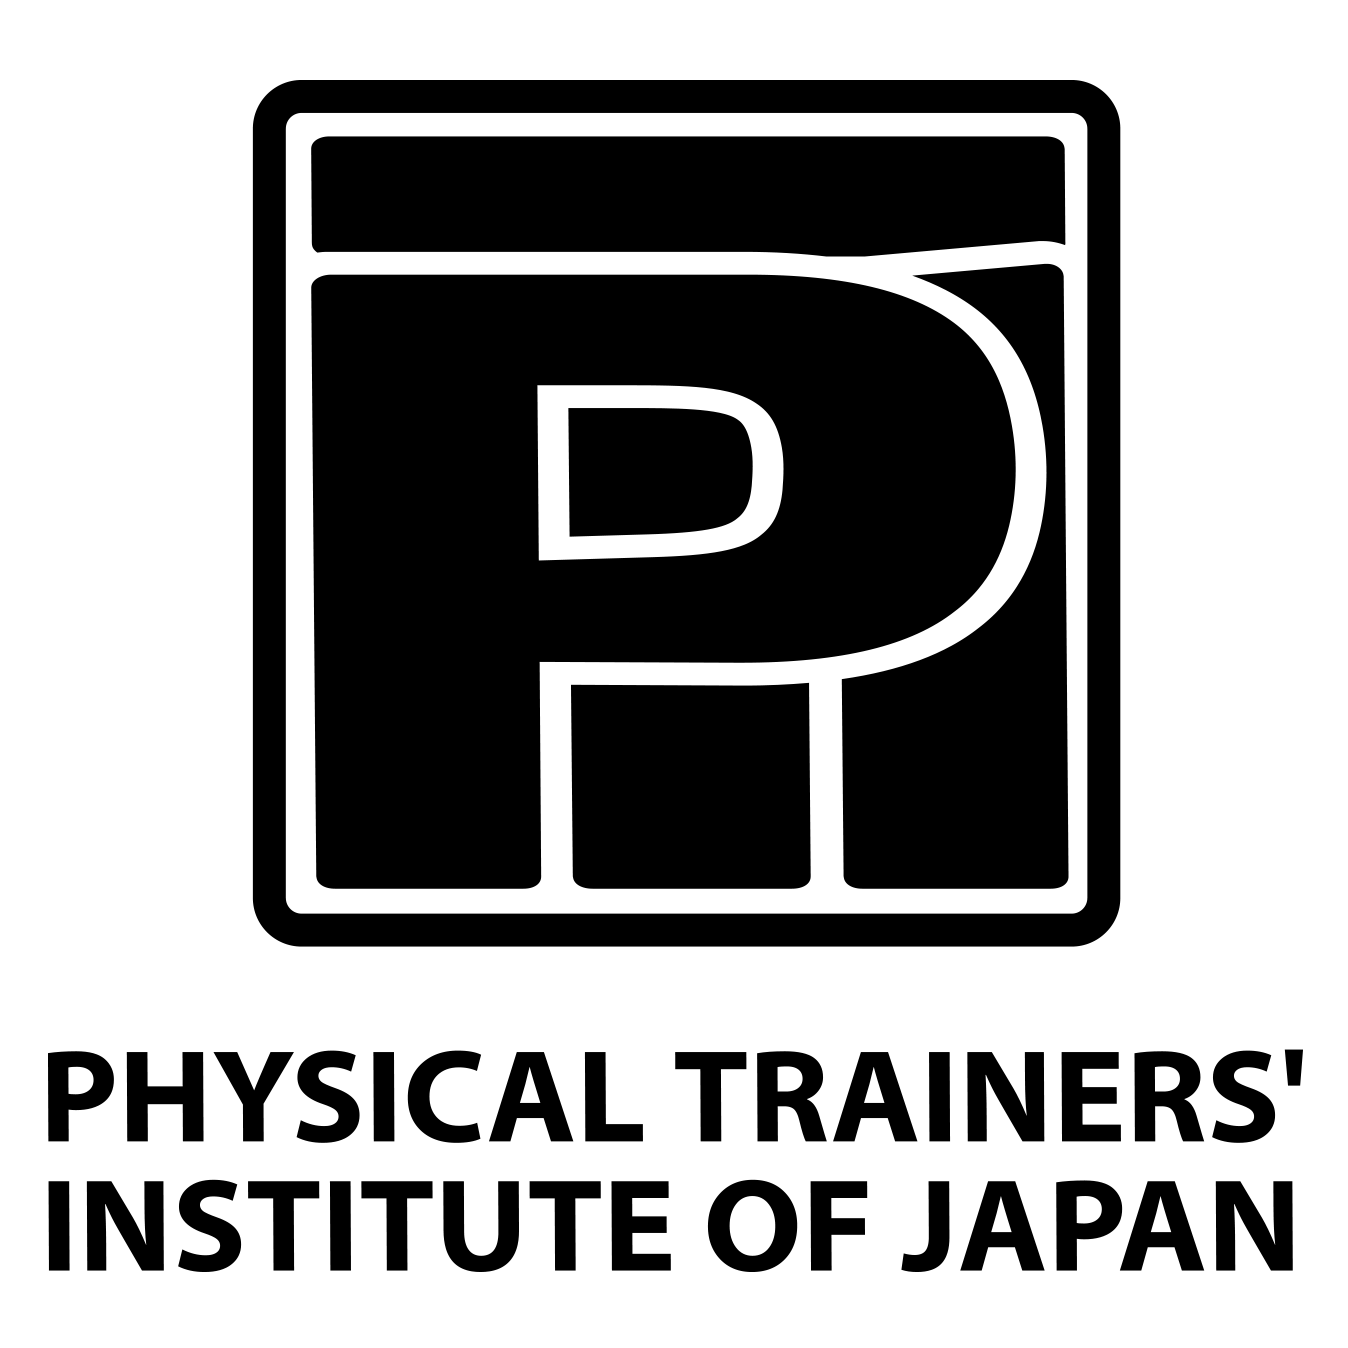 「PHYSICAL TRAINER‘S　INSTITUTE OF JAPAN」の文字と白黒のロゴ